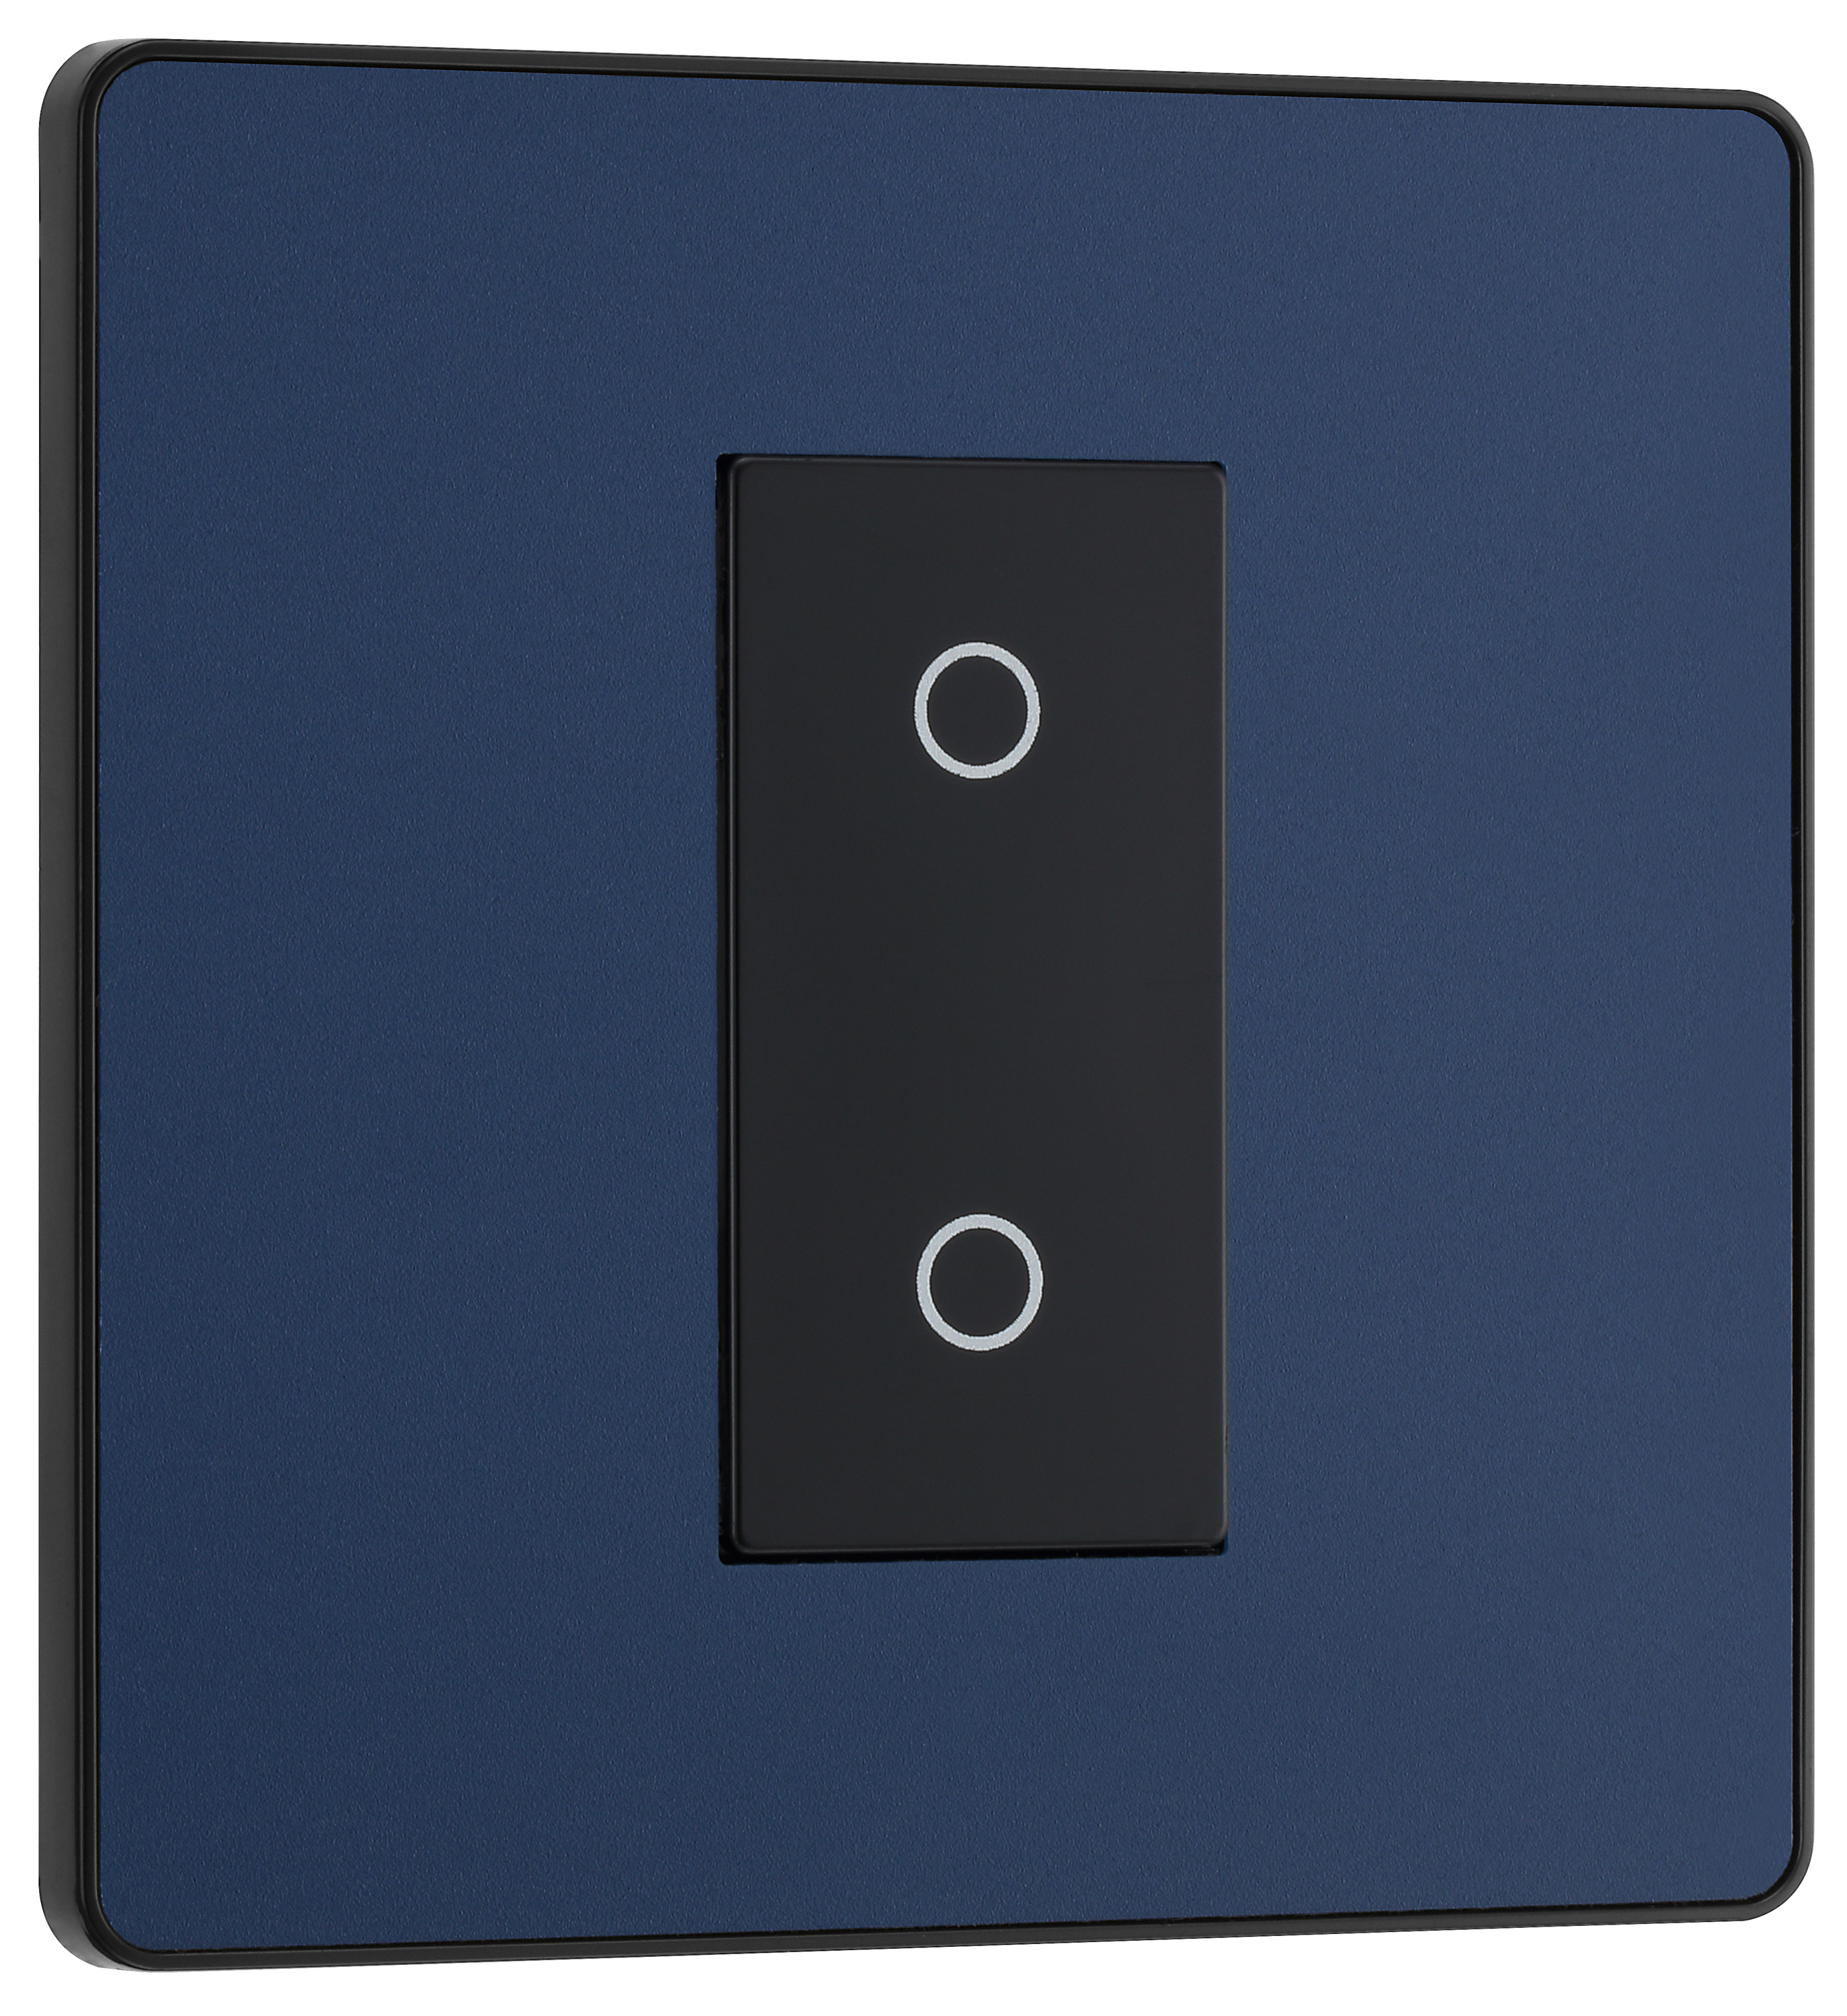 Image of BG Evolve Secondary Matt Blue 2 Way Double Touch Dimmer Switch - 200W